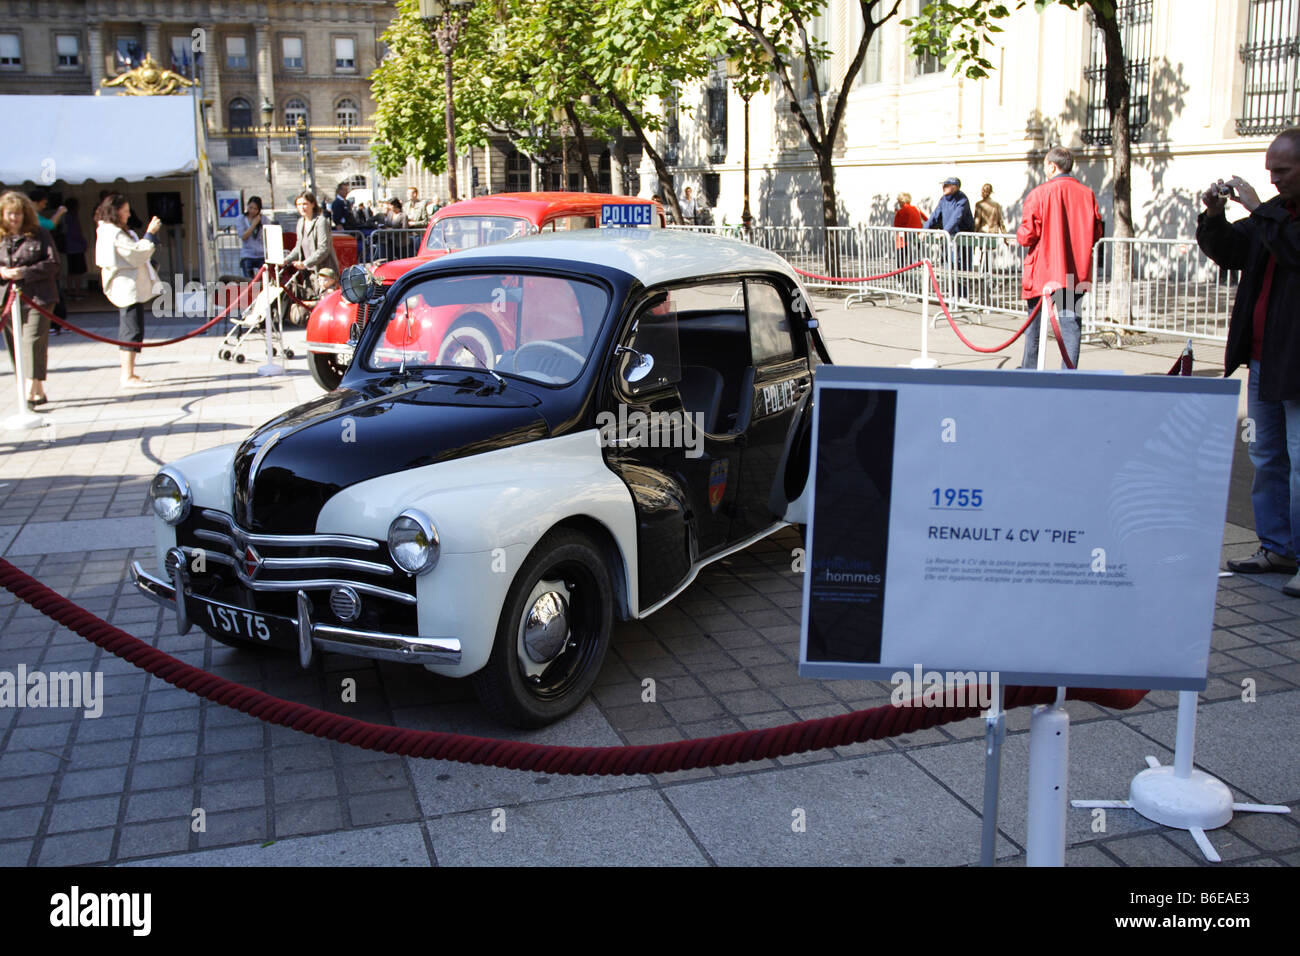 vintage 1955 renault 4 cv  u0026quot pie u0026quot  french police car  historic vehicle stock photo  royalty free